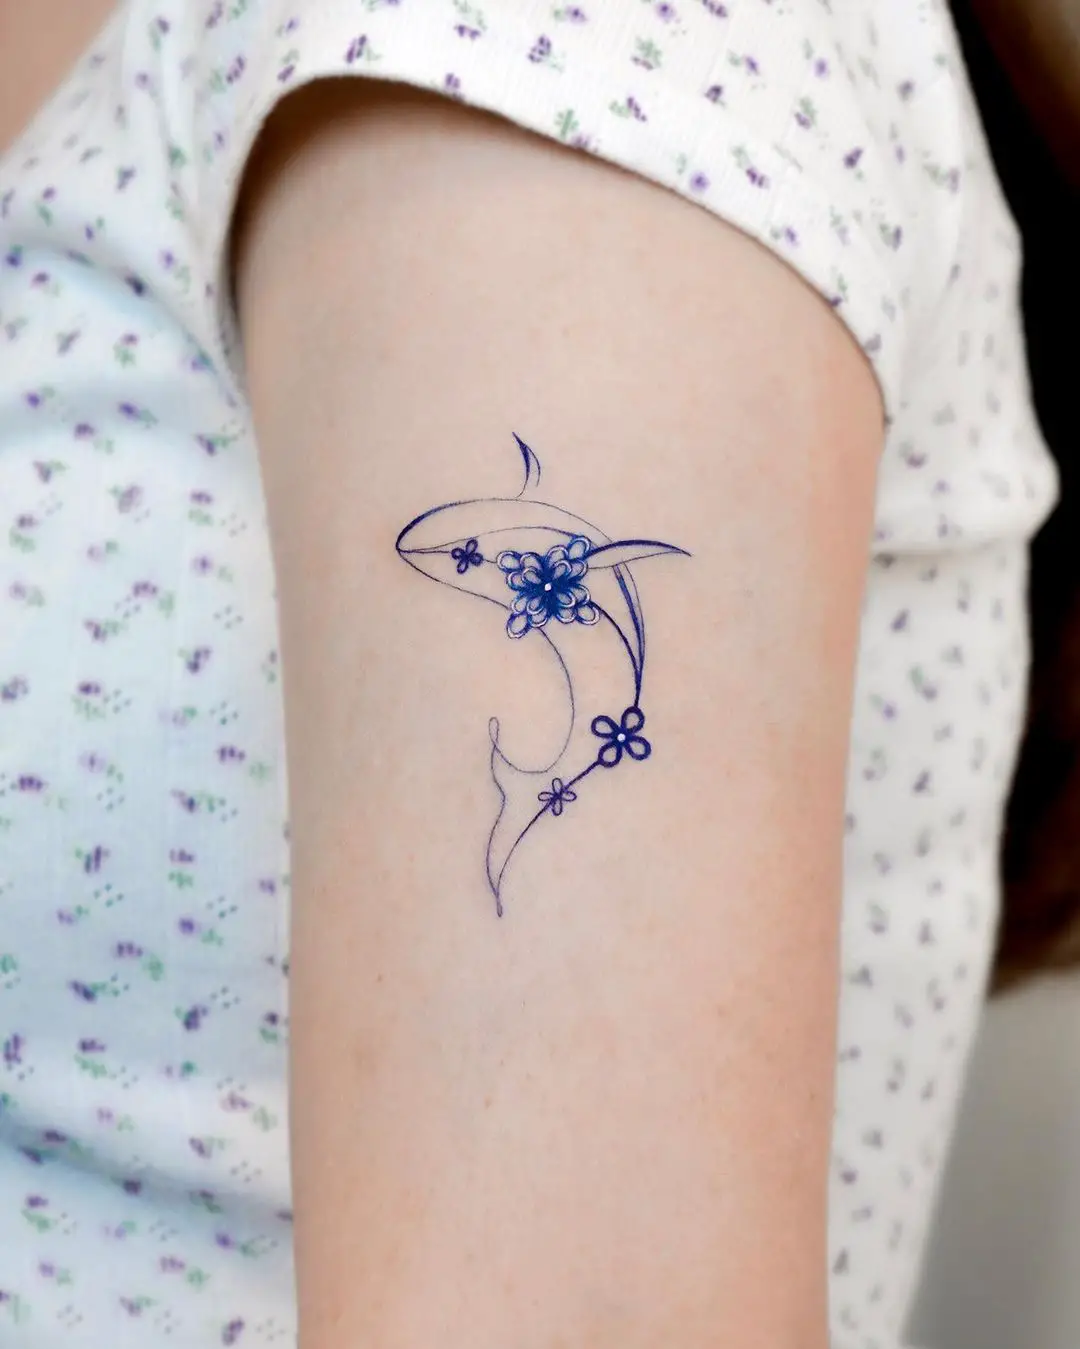 Unique whale tattoo by hwyl.tattoo